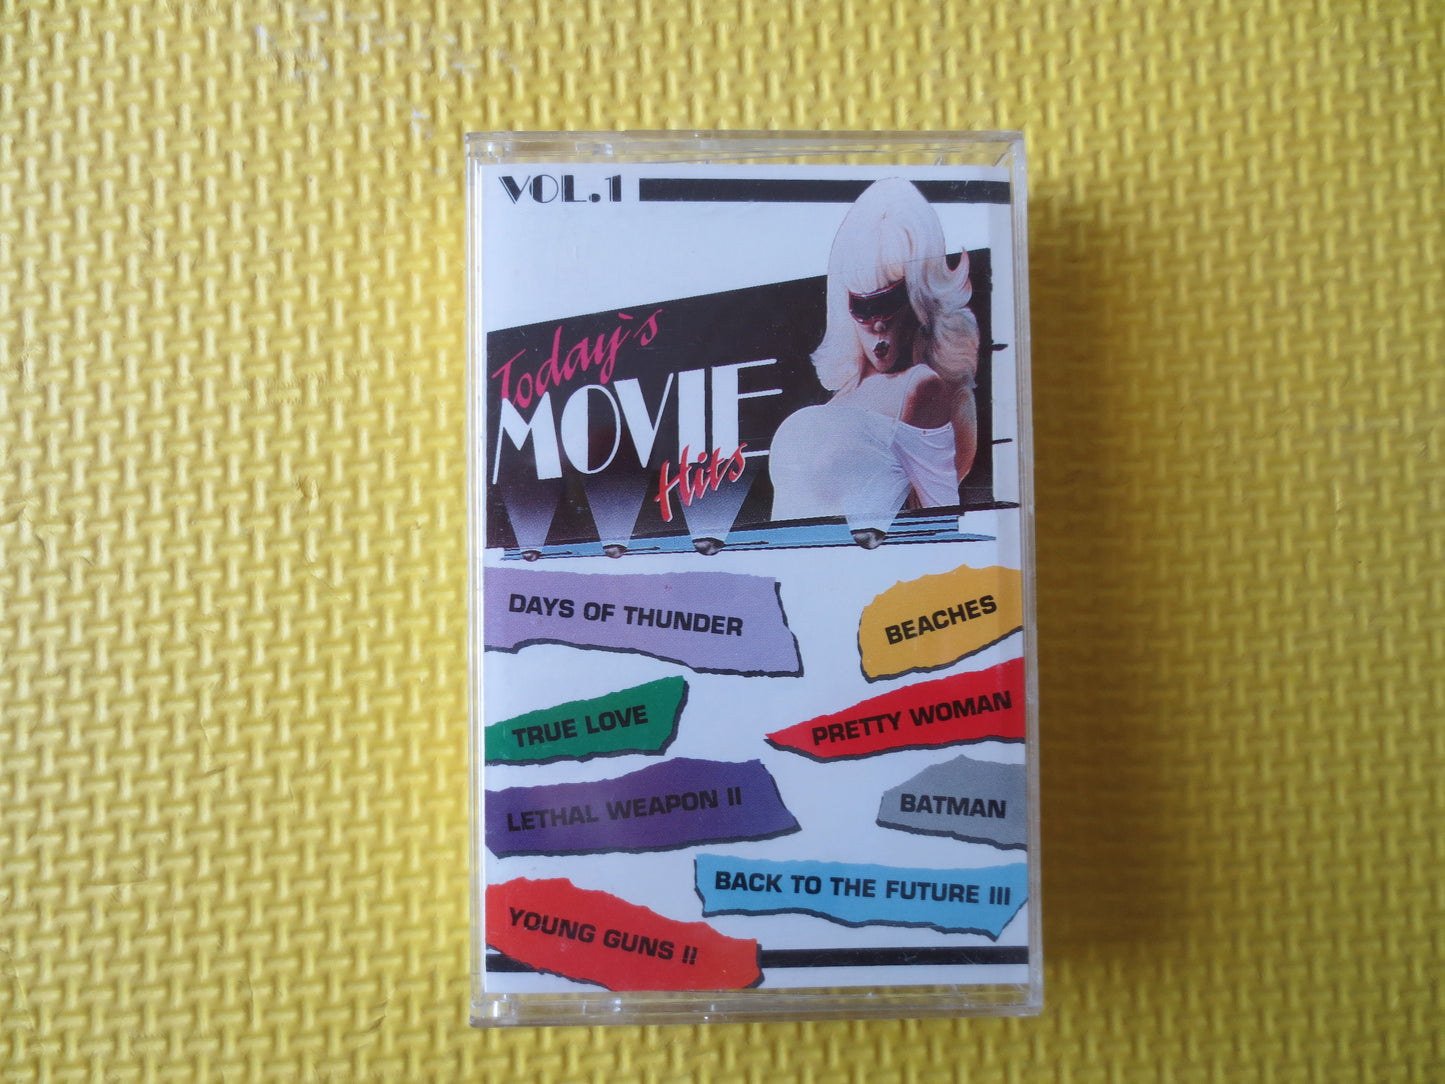 Today's MOVIE HITS, Volume 1, MOVIE Songs, Soundtrack Tapes, Tape Cassette, Movie lp, Tapes, Rock Cassette, Cassette Music